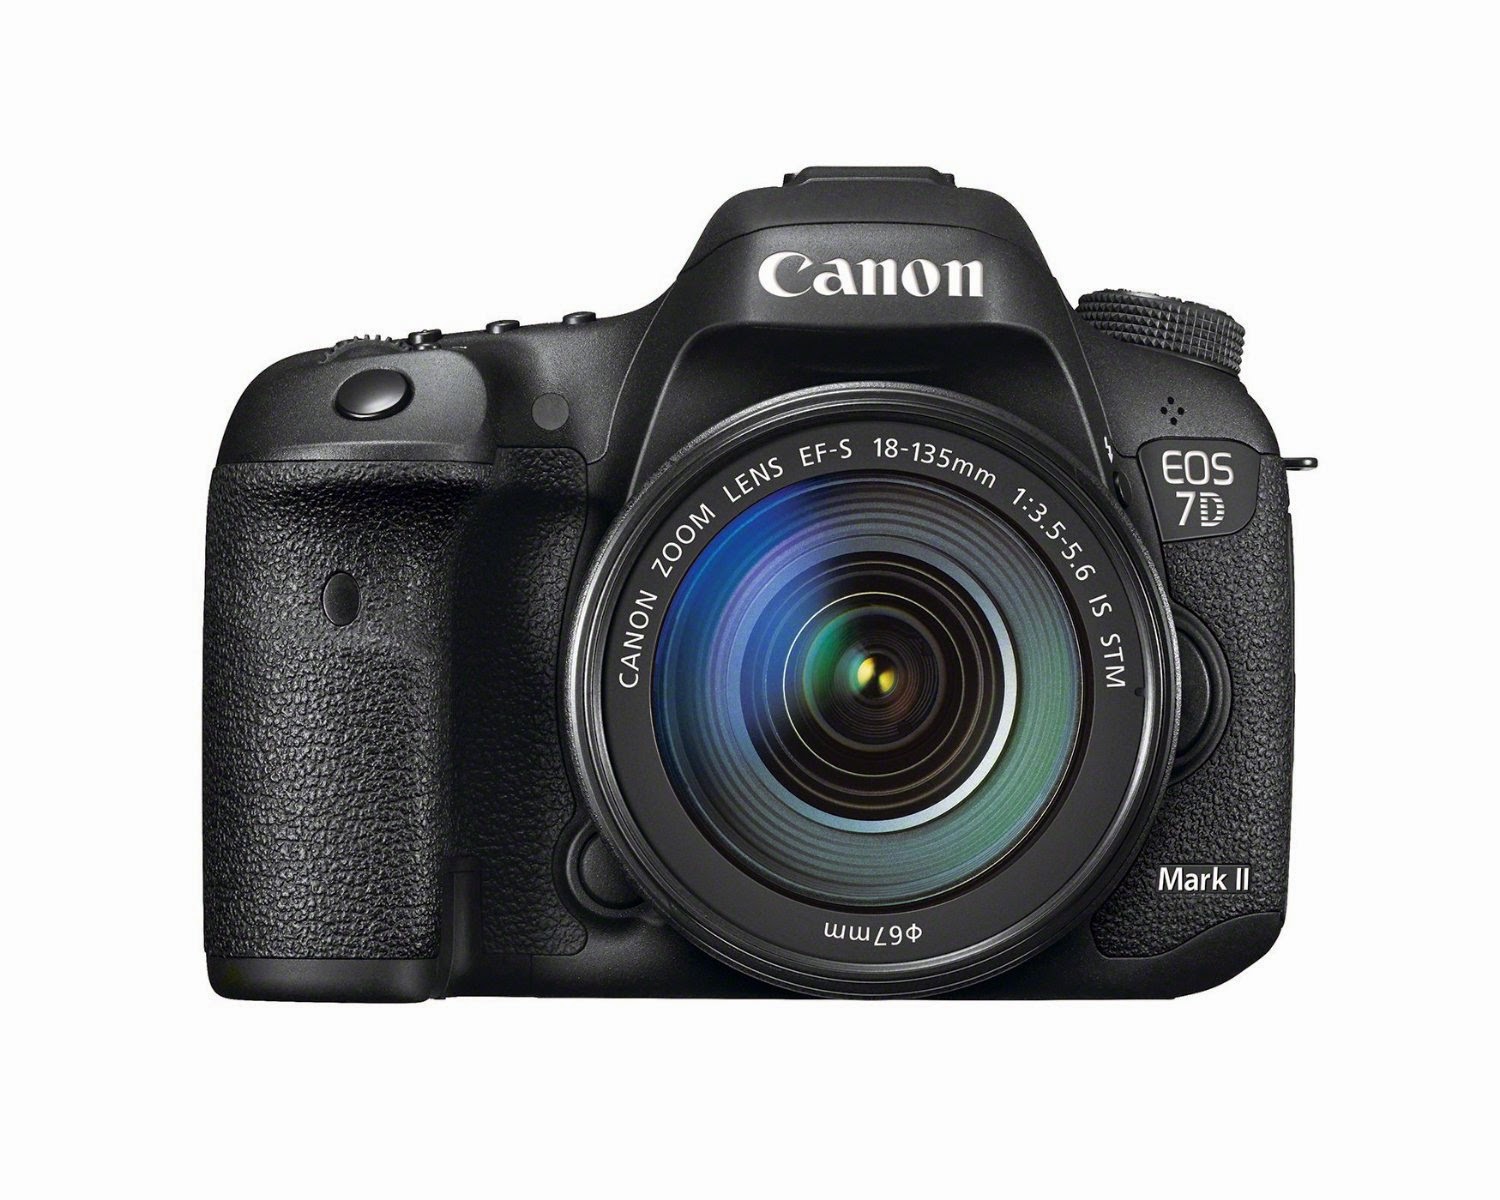 Canon EOS 7 D Mark II Digital SLR Camera, review, APS-C 20.2 MP CMOS sensor, Dual DIGIC 6 image processors, dual pixel CMOS AF for video, 10 fps continuous shooting, 65 all cross-type AF points, GPS